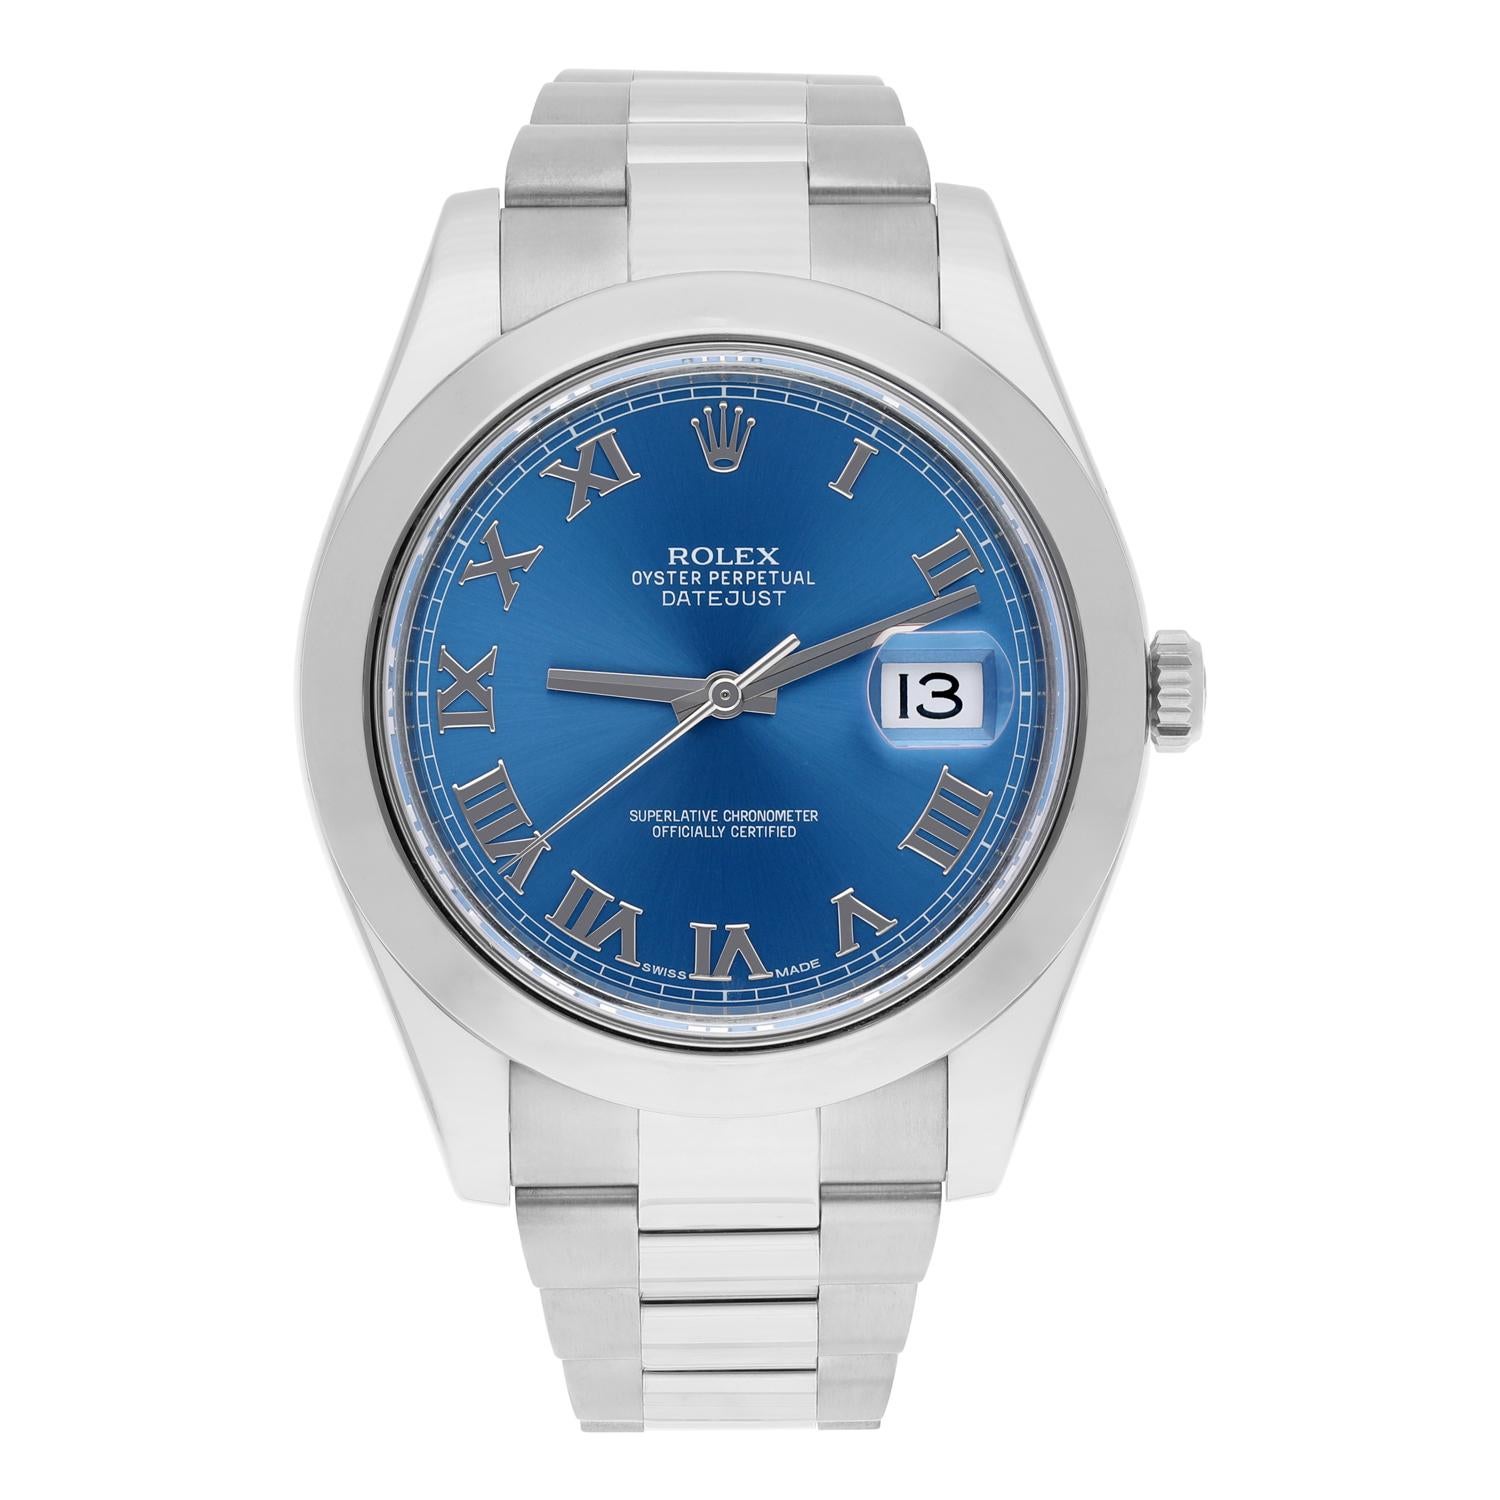 Rolex Datejust II Steel Blue Roman Dial Oyster Bracelet Mens 41mm Watch 116300. Watch has been professionally polished, serviced and does not have any visible scratches or blemishes. Mint.
Sale comes with a Rolex box, appraisal certificate